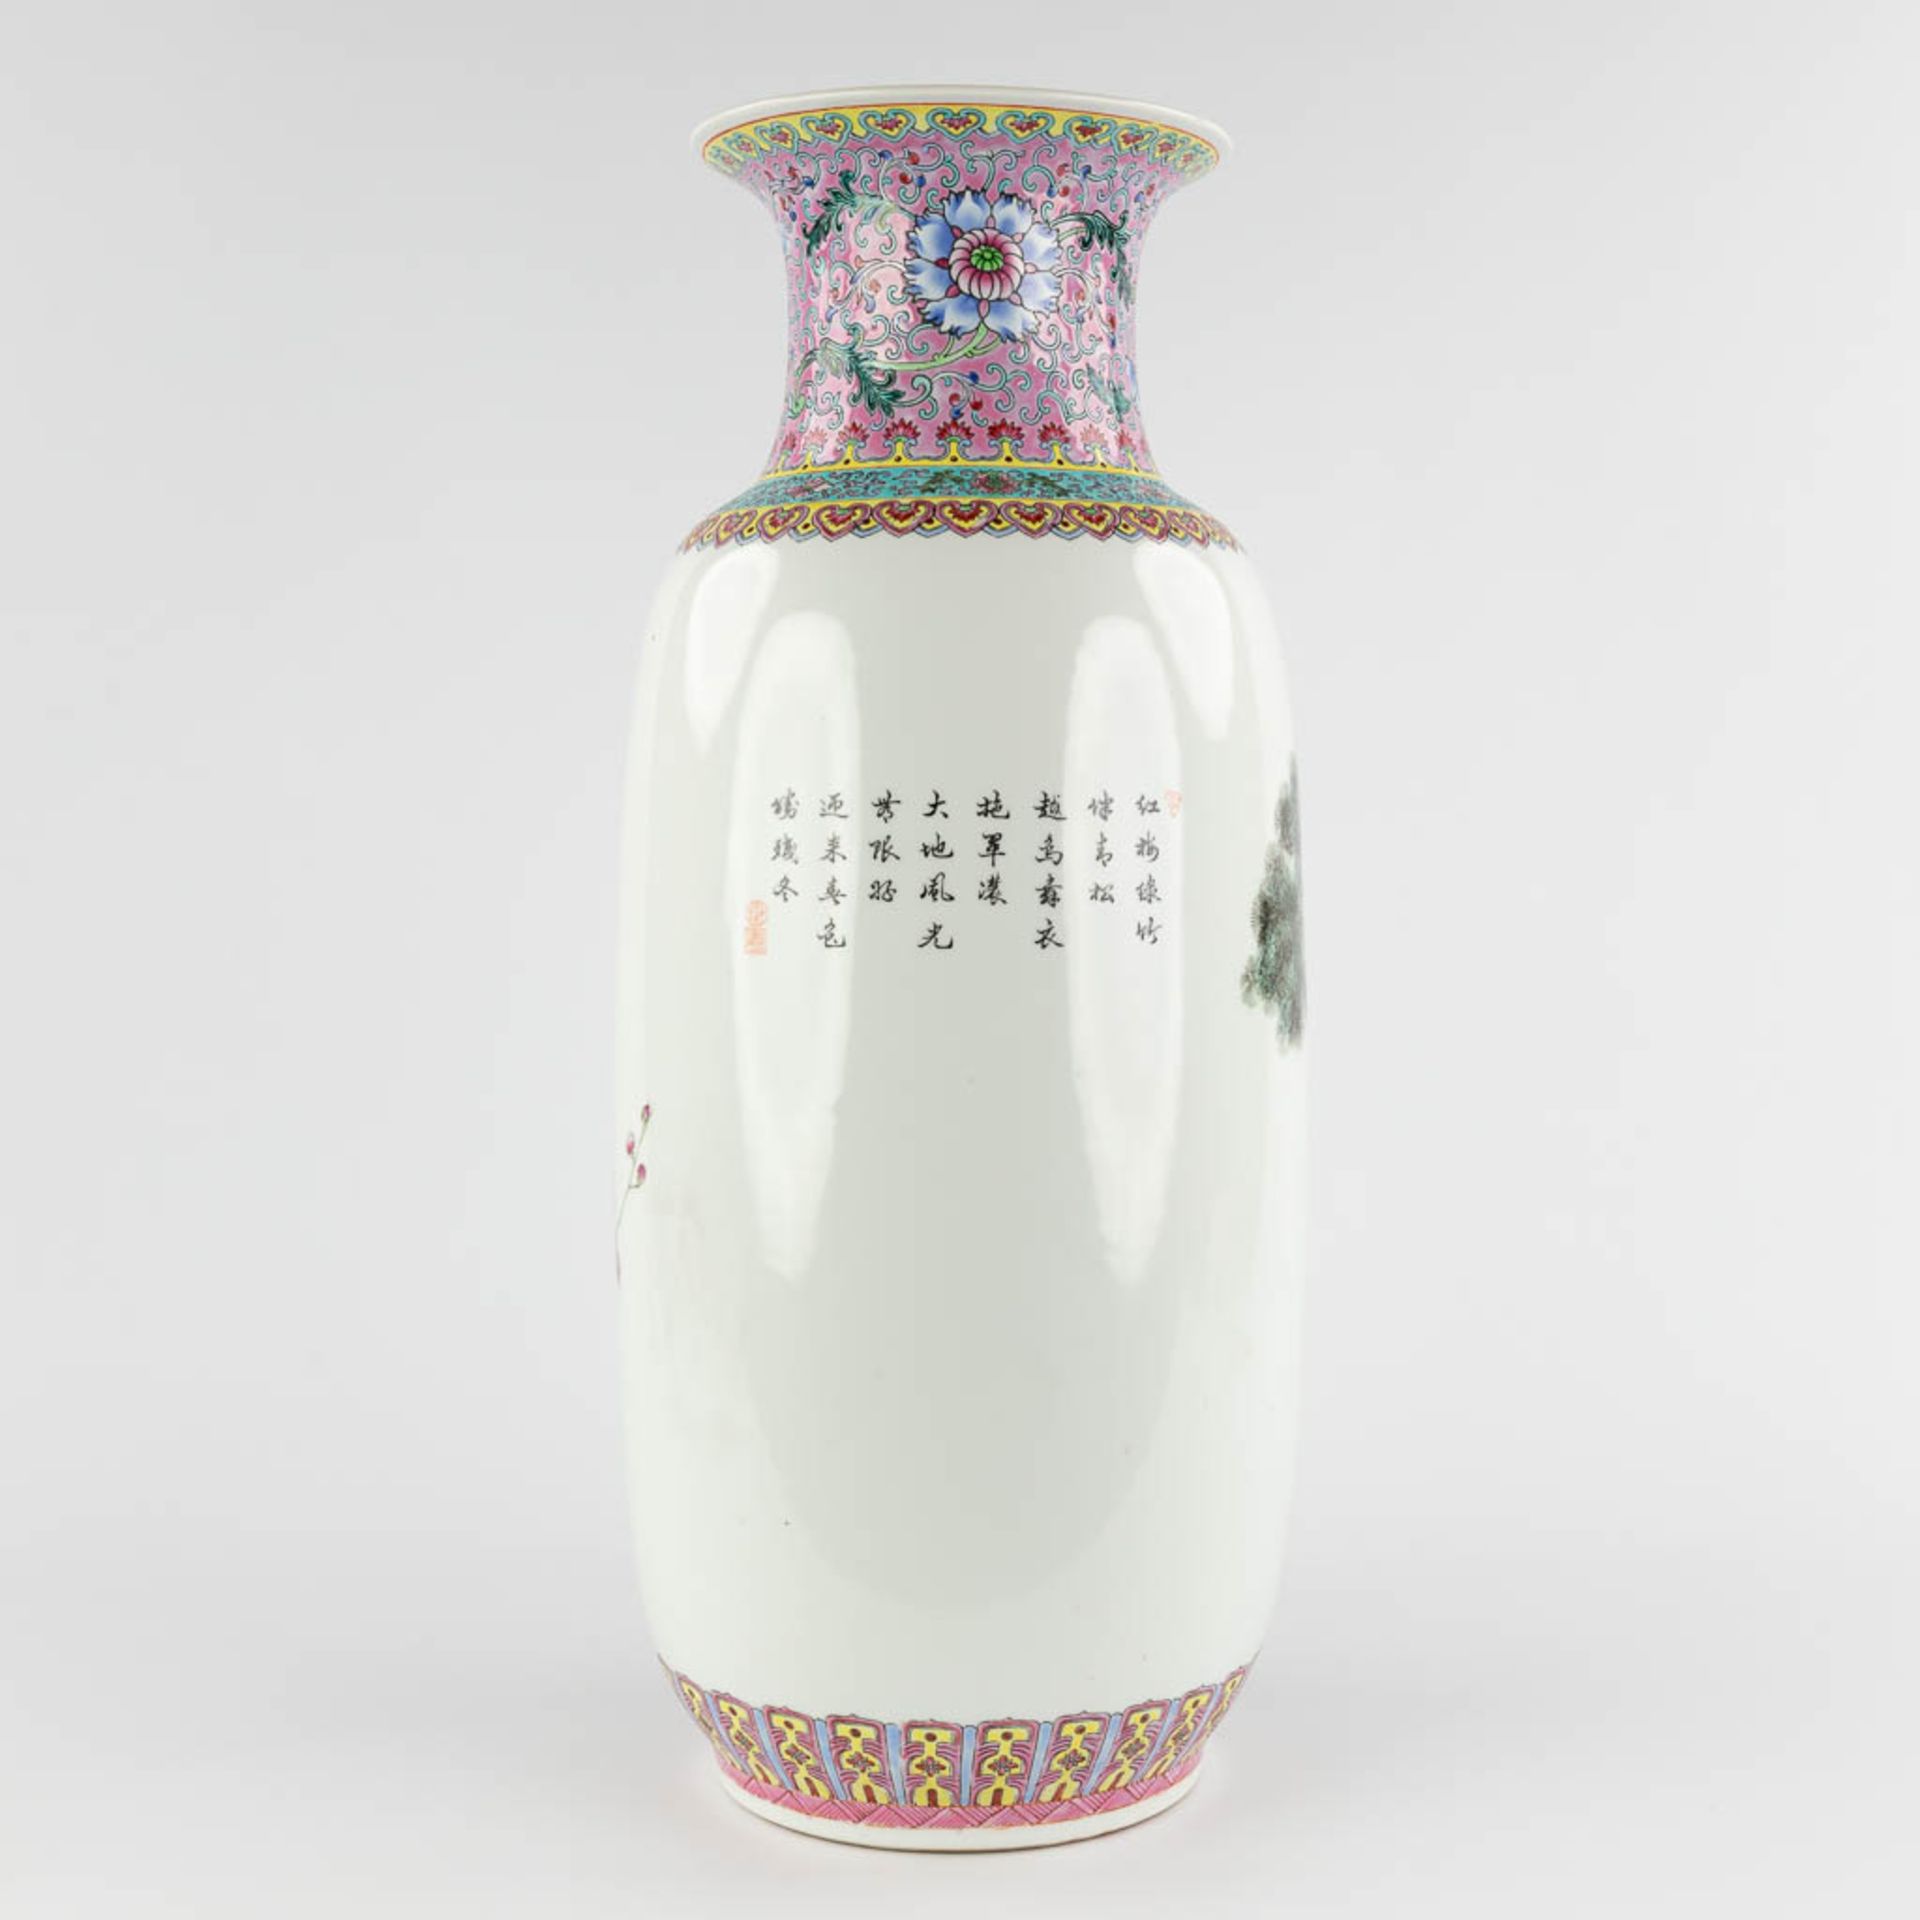 A Chinese vase decorated with peacocks, 20th C. (H:60 x D:24 cm) - Image 5 of 13